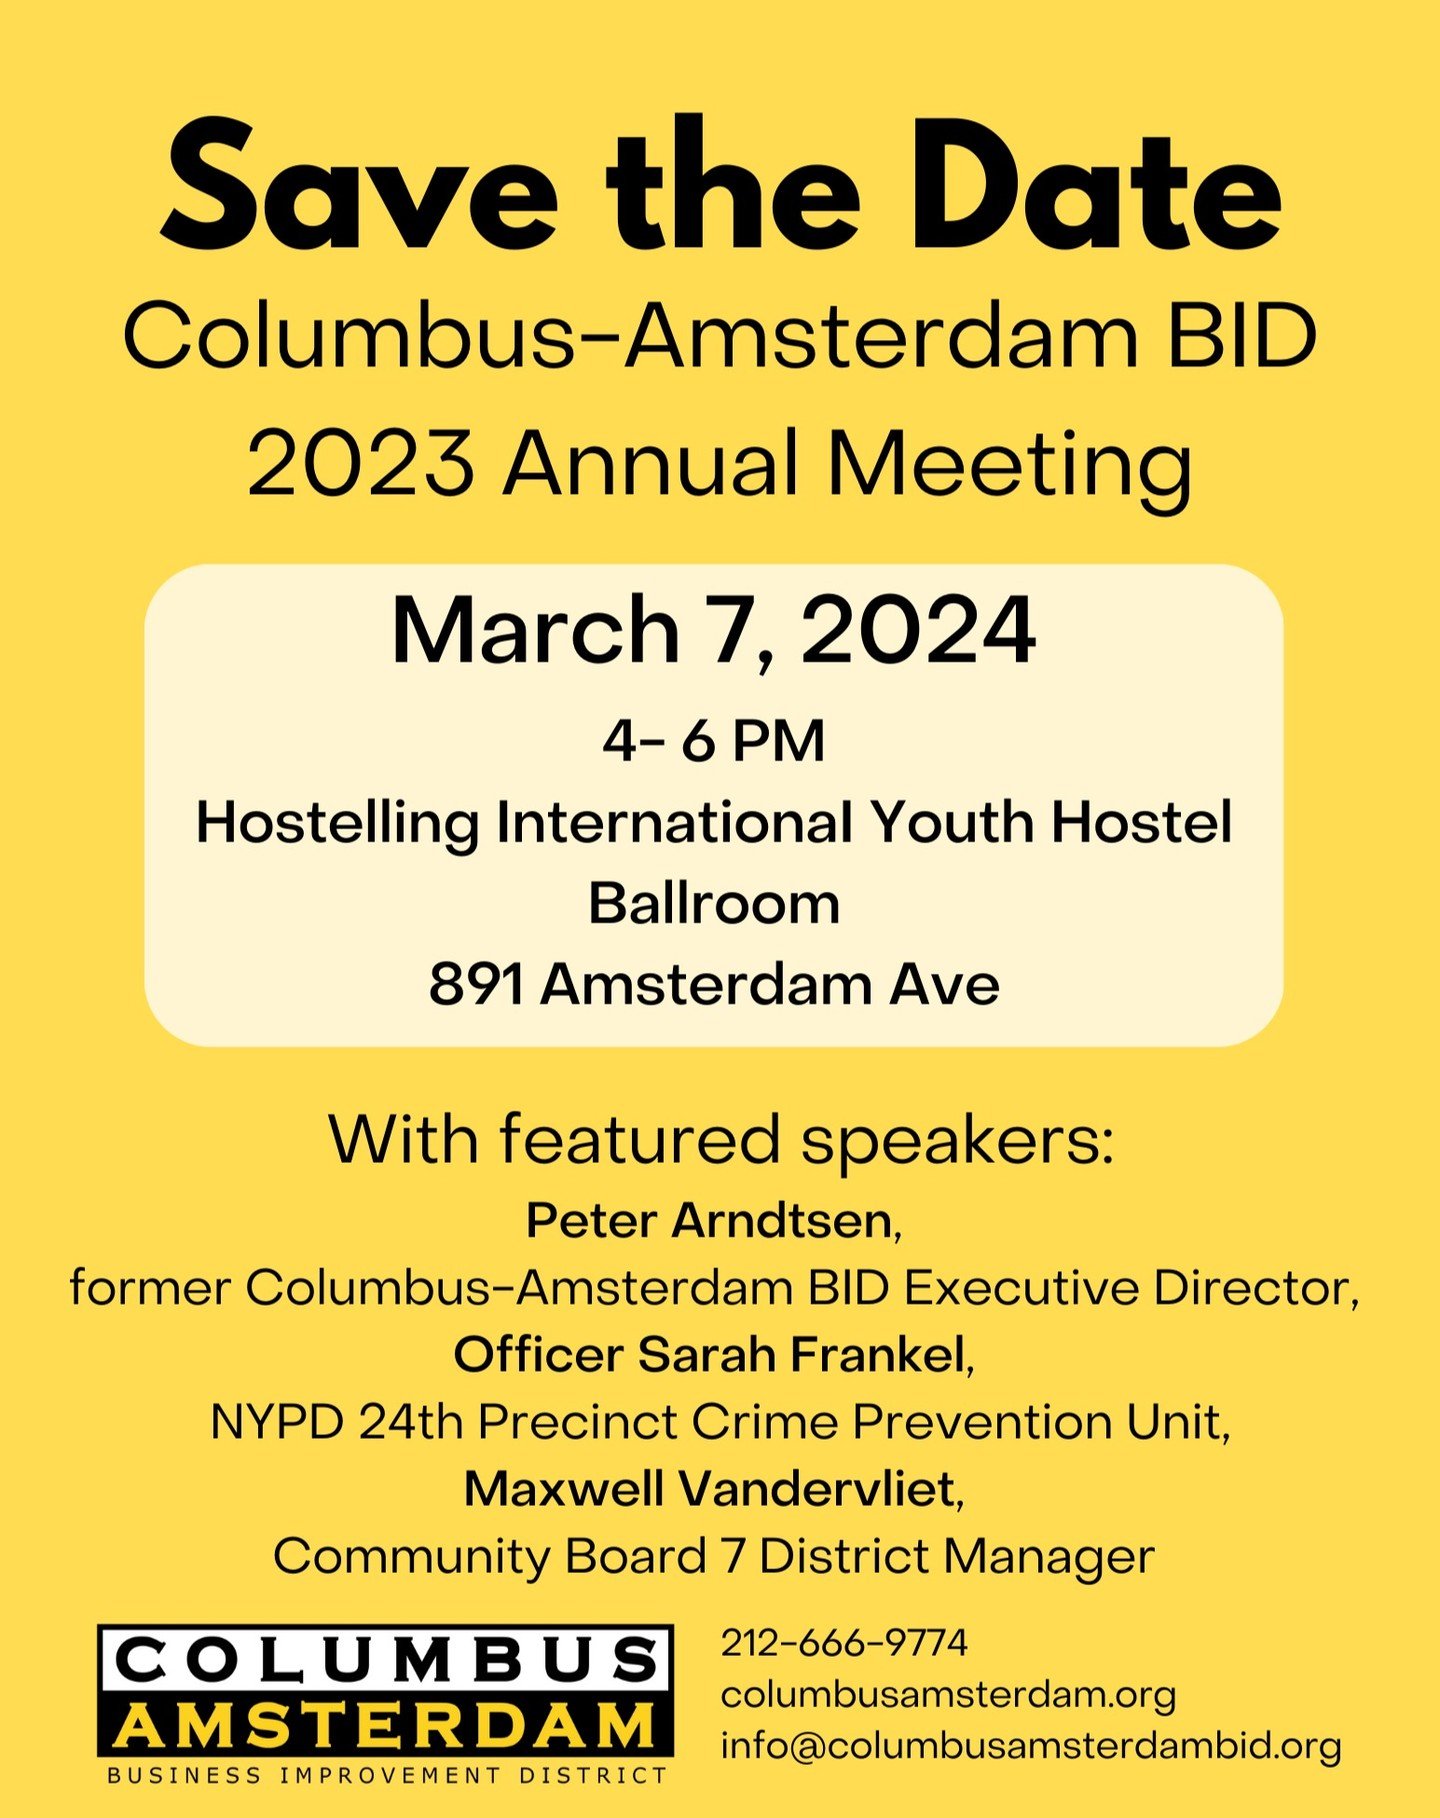 Our Annual Meeting is coming up soon! We hope you will join us in celebrating our past year of hard work with presentations, food, and drink. We will also be voting on Board minutes and members at this meeting. If you plan on attending, click the lin